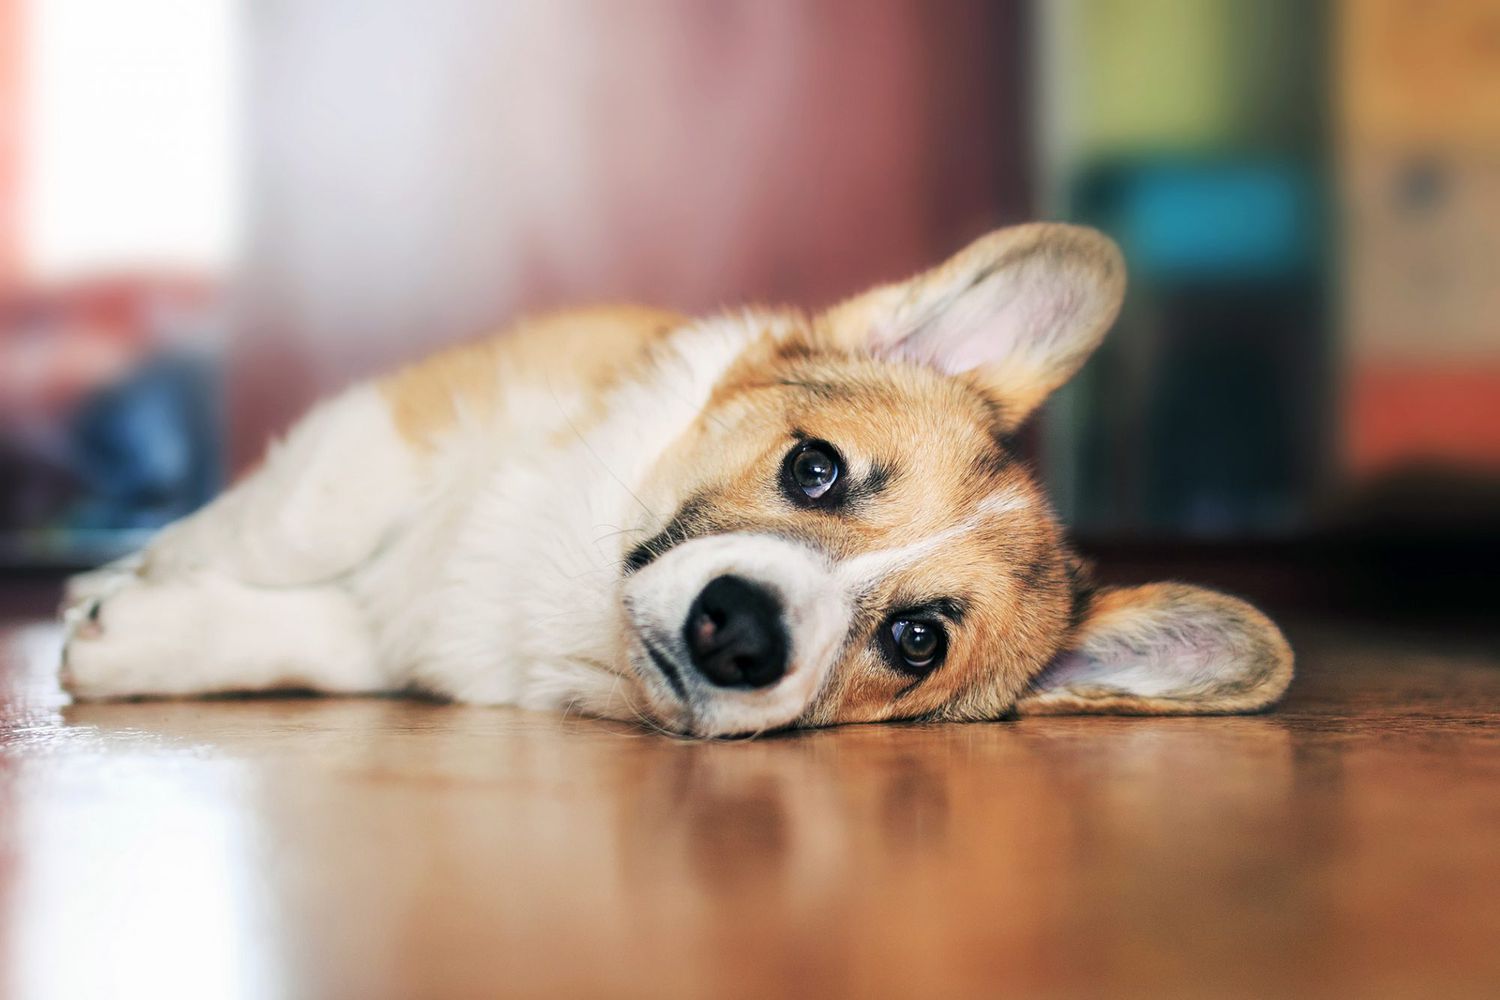 Signs of Depression in Dogs and How to Help Your Pup Cope | Daily Paws